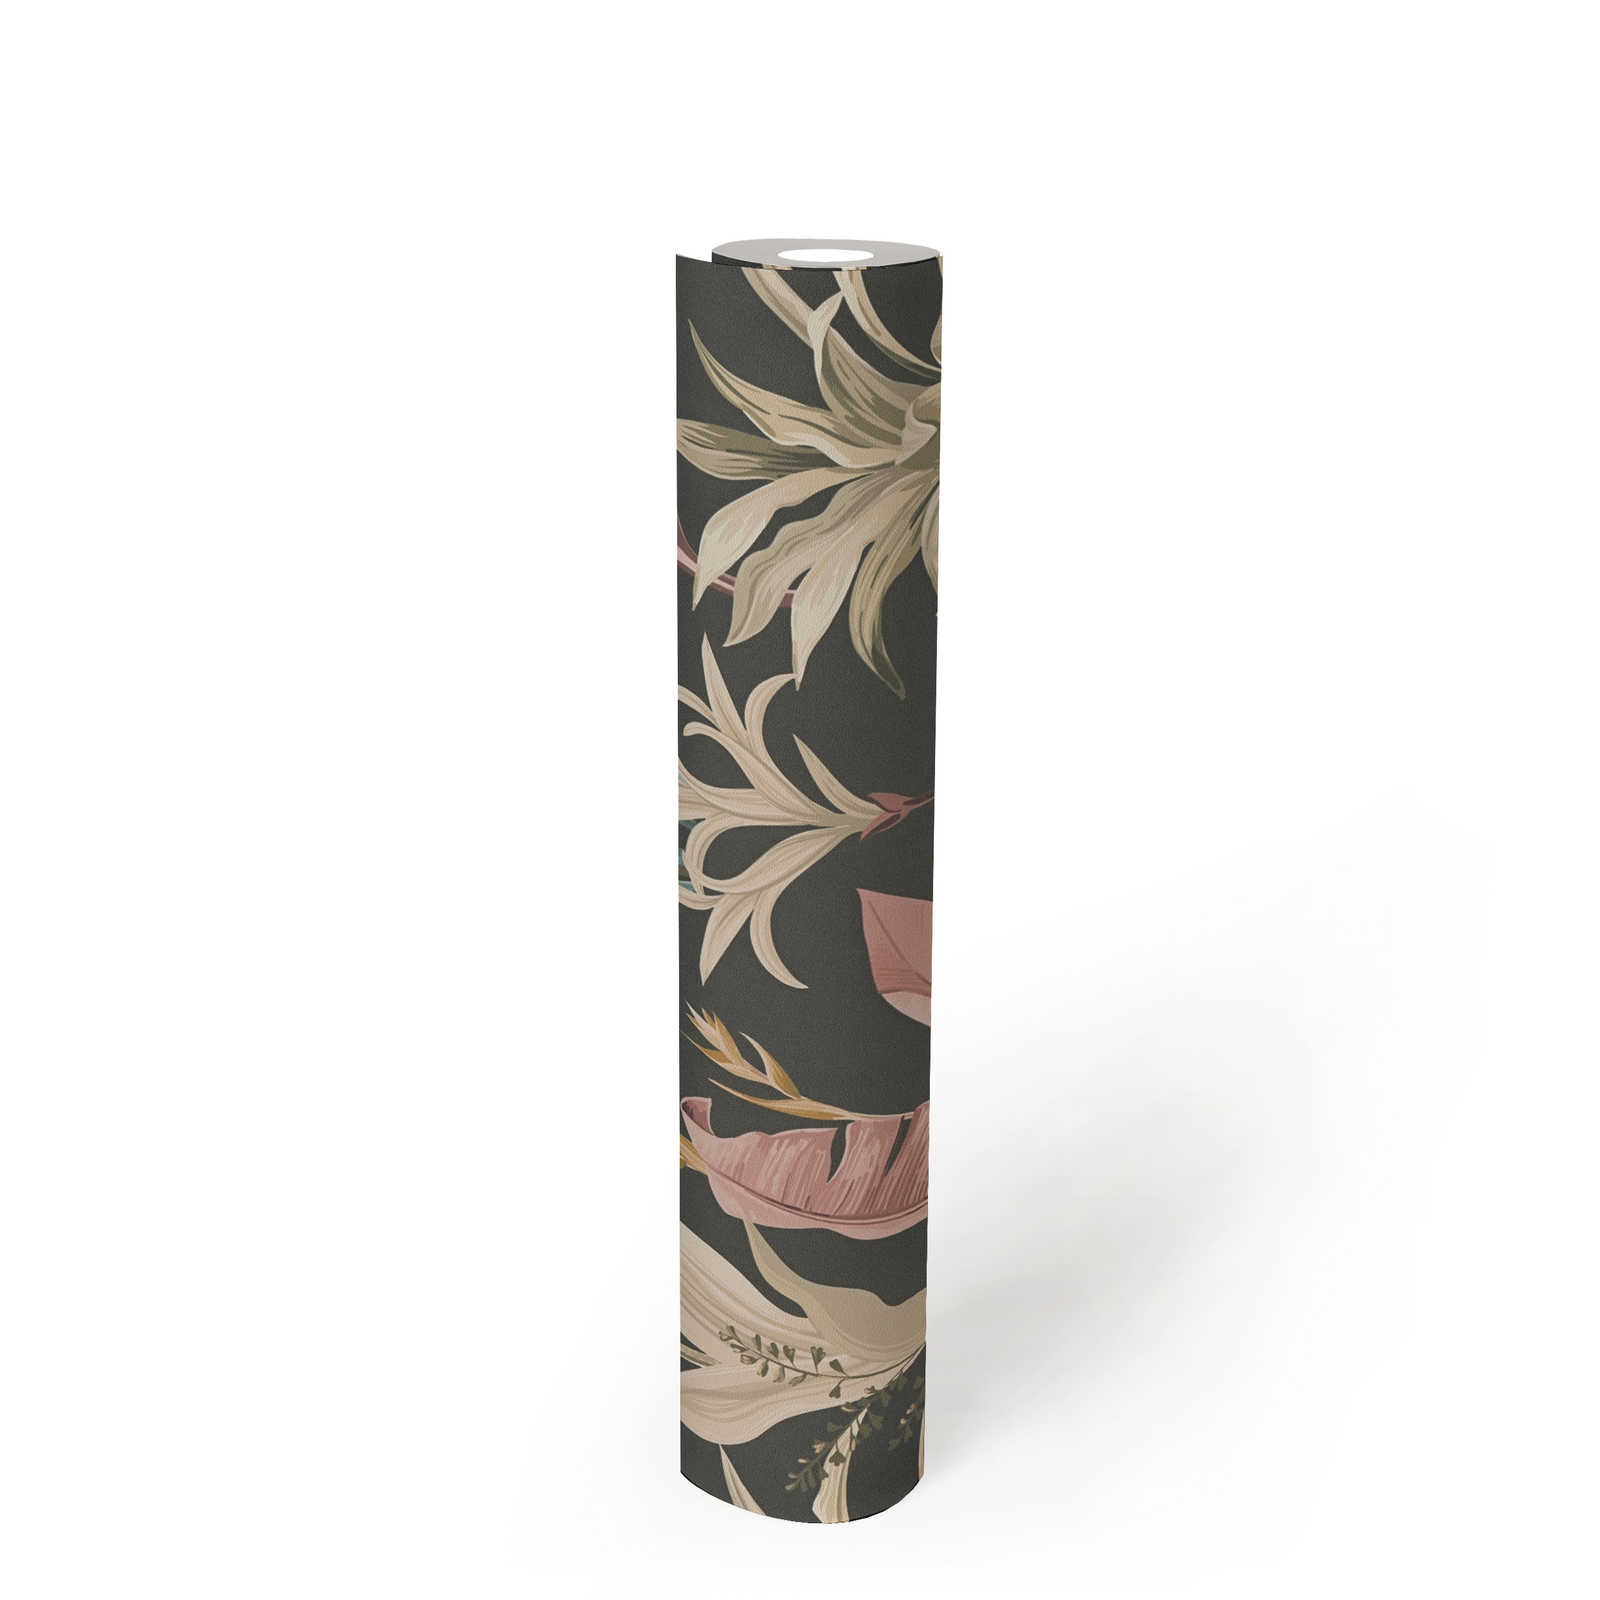             Non-woven wallpaper detailed with floral leaves pattern - blue, pink, brown
        